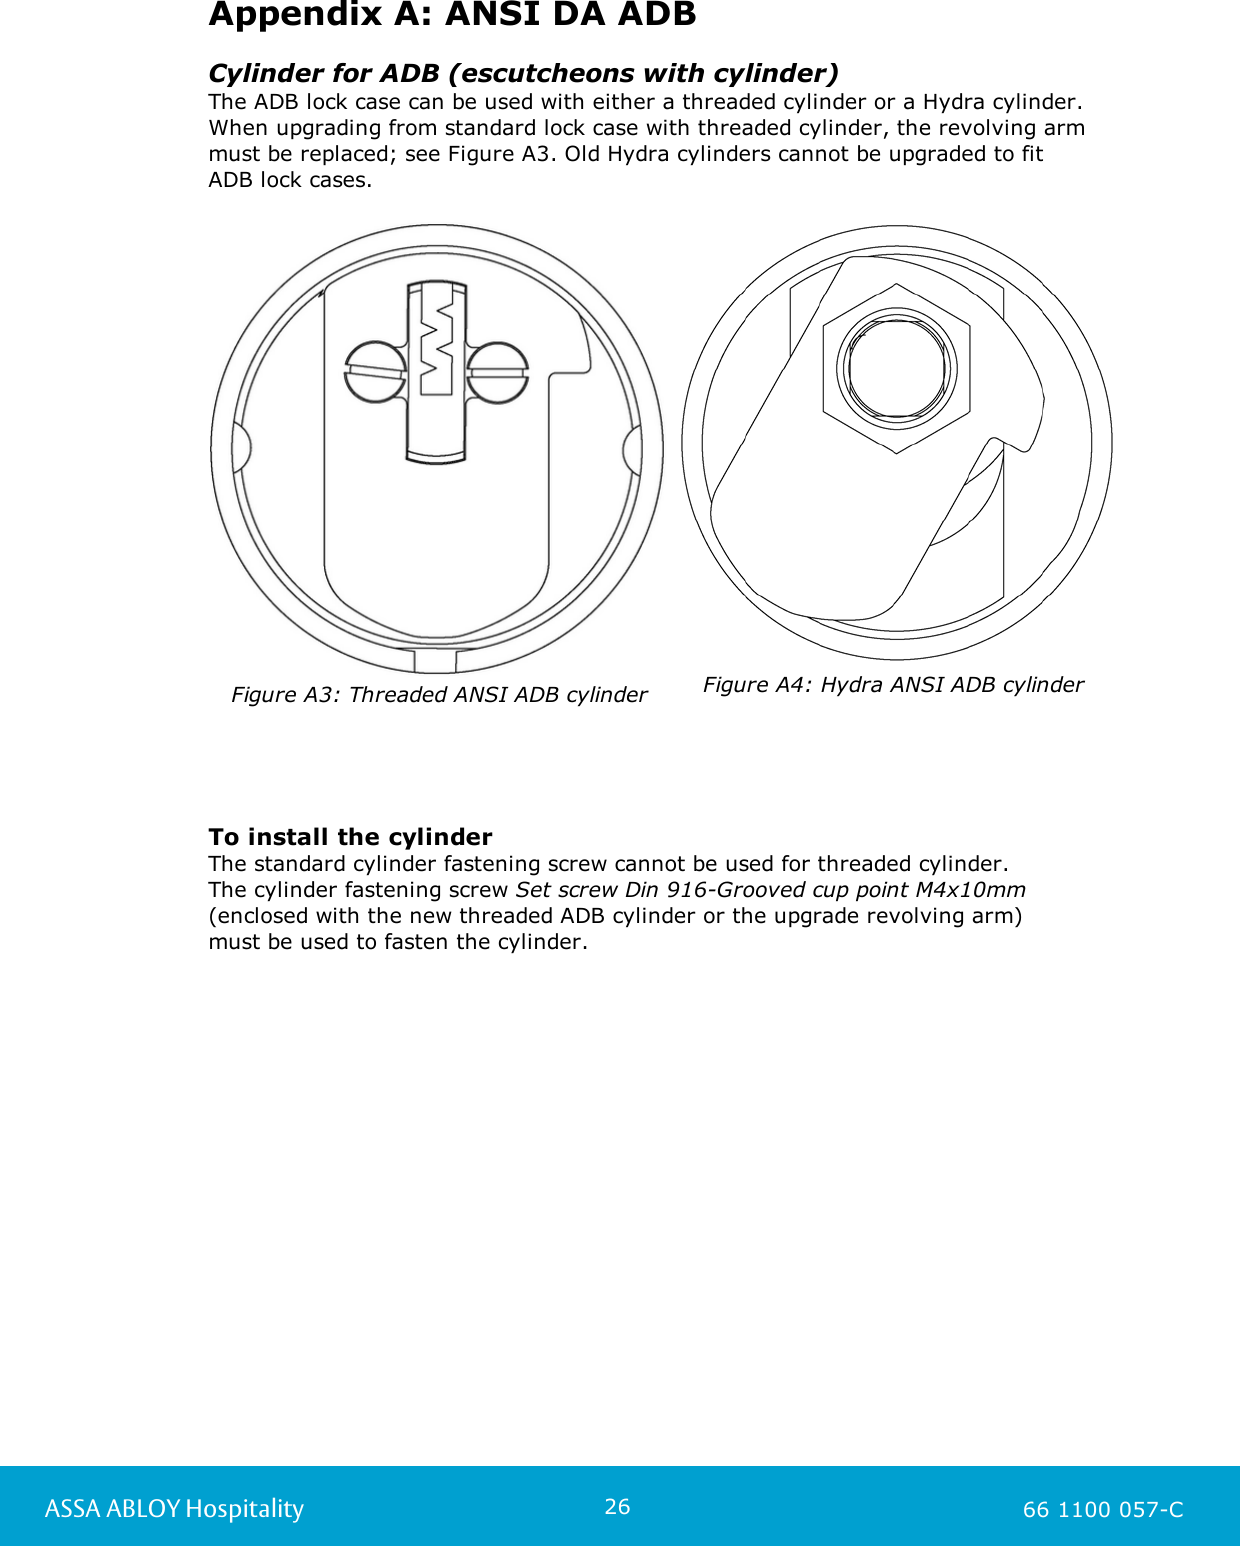 26ASSA ABLOY Hospitality 66 1100 057-CAppendix A: ANSI DA ADBCylinder for ADB (escutcheons with cylinder)The ADB lock case can be used with either a threaded cylinder or a Hydra cylinder.When upgrading from standard lock case with threaded cylinder, the revolving armmust be replaced; see Figure A3. Old Hydra cylinders cannot be upgraded to fit ADB lock cases.Figure A3: Threaded ANSI ADB cylinderFigure A4: Hydra ANSI ADB cylinderTo install the cylinderThe standard cylinder fastening screw cannot be used for threaded cylinder. The cylinder fastening screw Set screw Din 916-Grooved cup point M4x10mm(enclosed with the new threaded ADB cylinder or the upgrade revolving arm) must be used to fasten the cylinder.